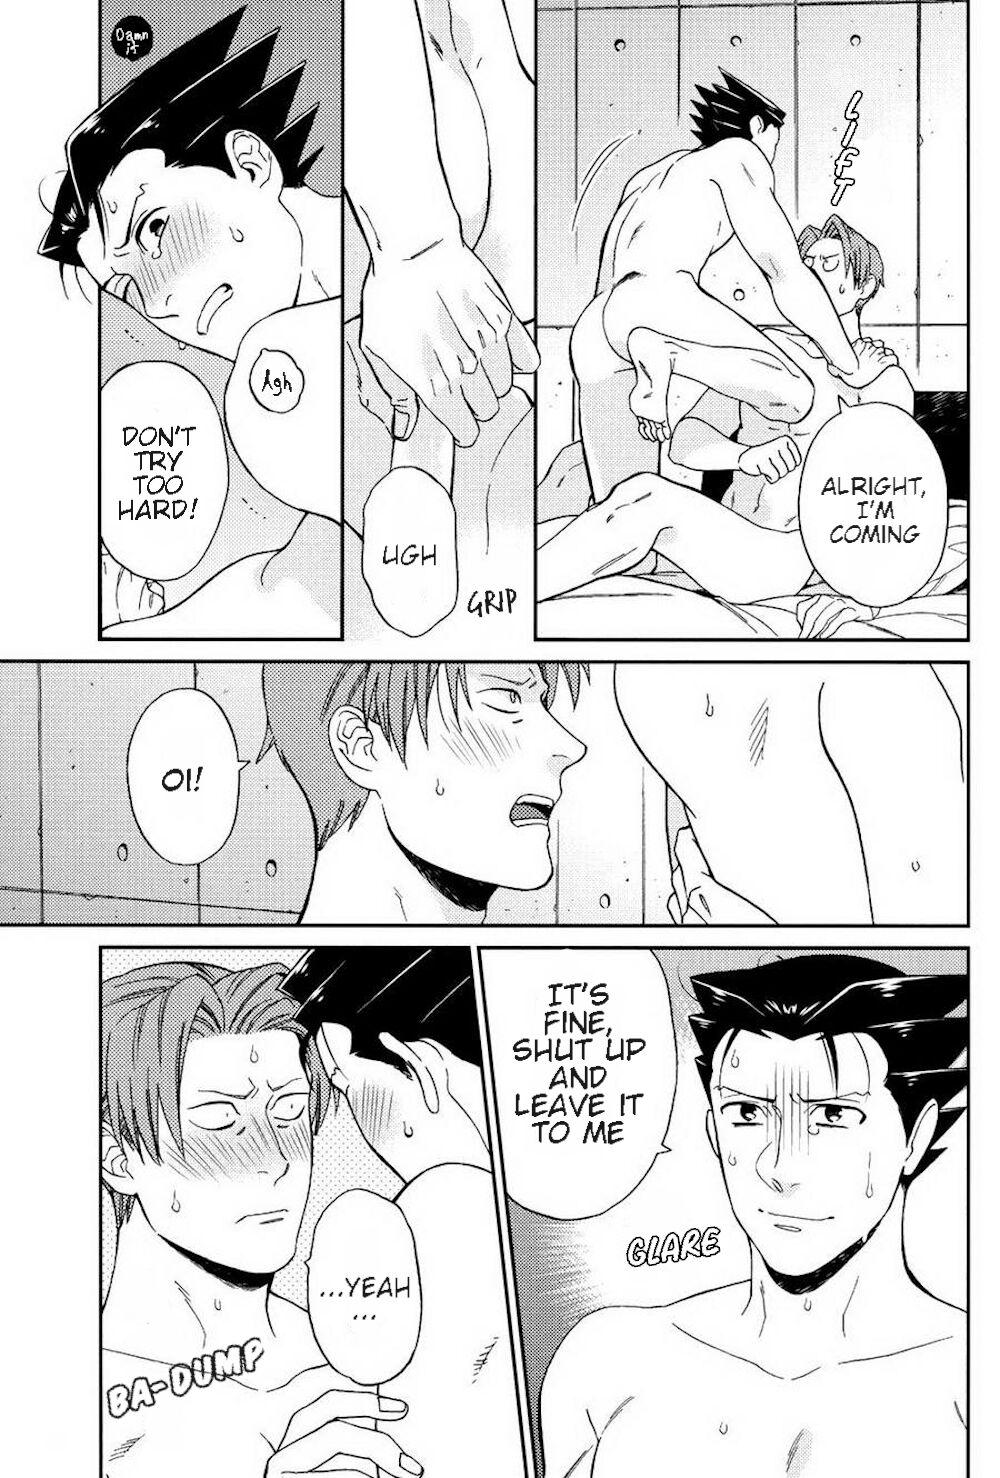 Girl Gets Fucked Kid who can do it if he tries, kid who can't - Ace attorney | gyakuten saiban Cuckolding - Page 10